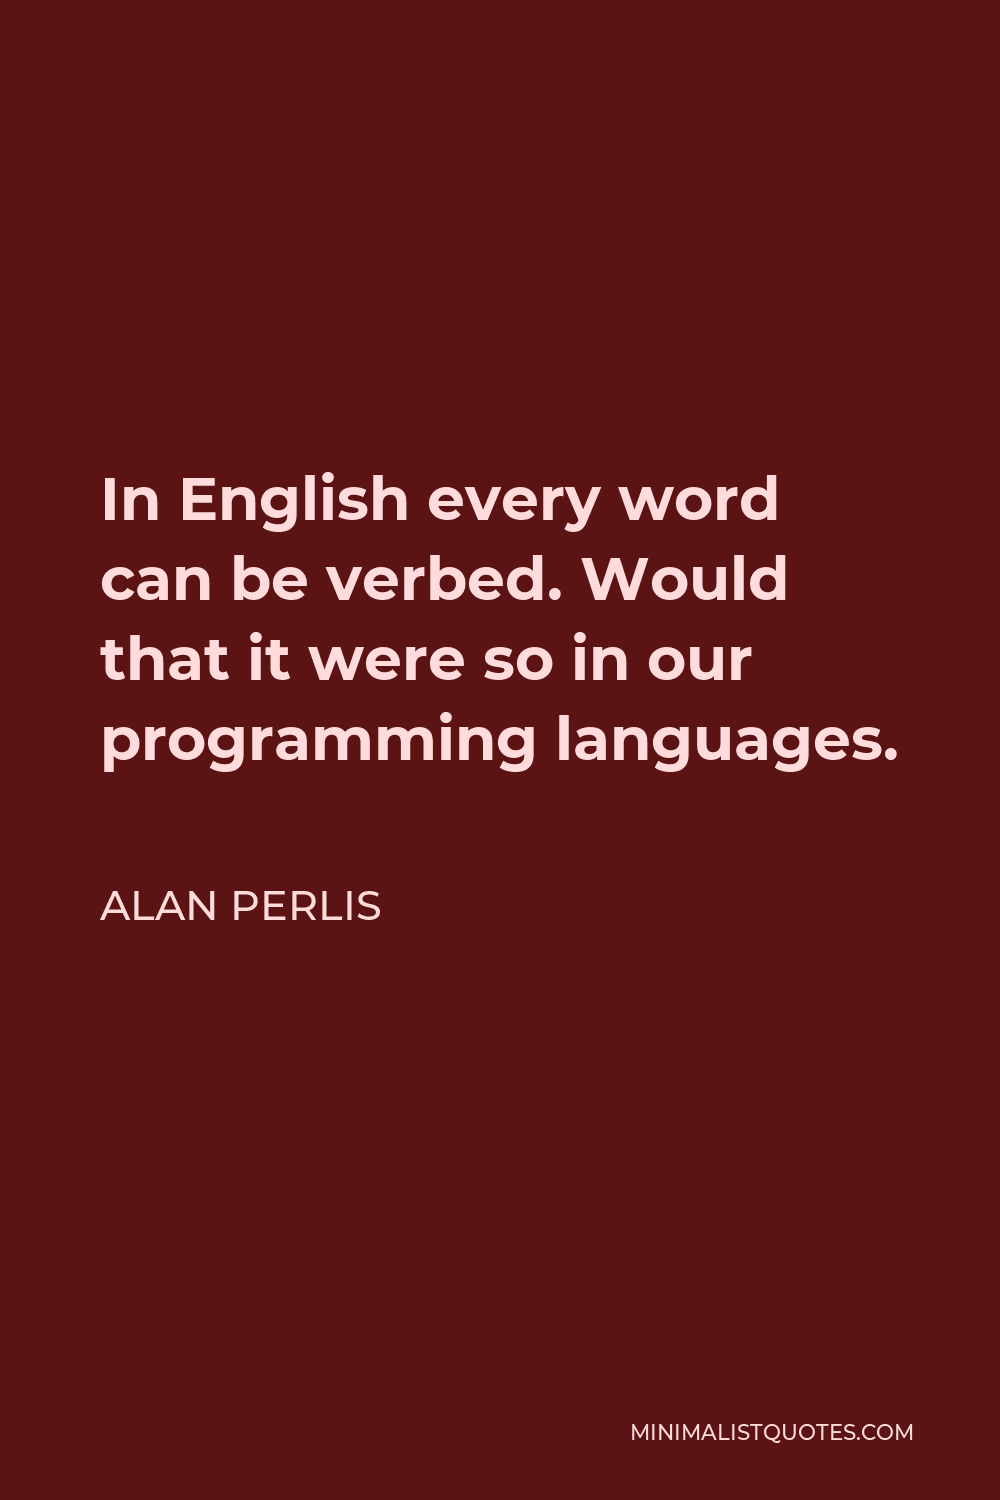 Alan Perlis Quote - In English every word can be verbed. Would that it were so in our programming languages.